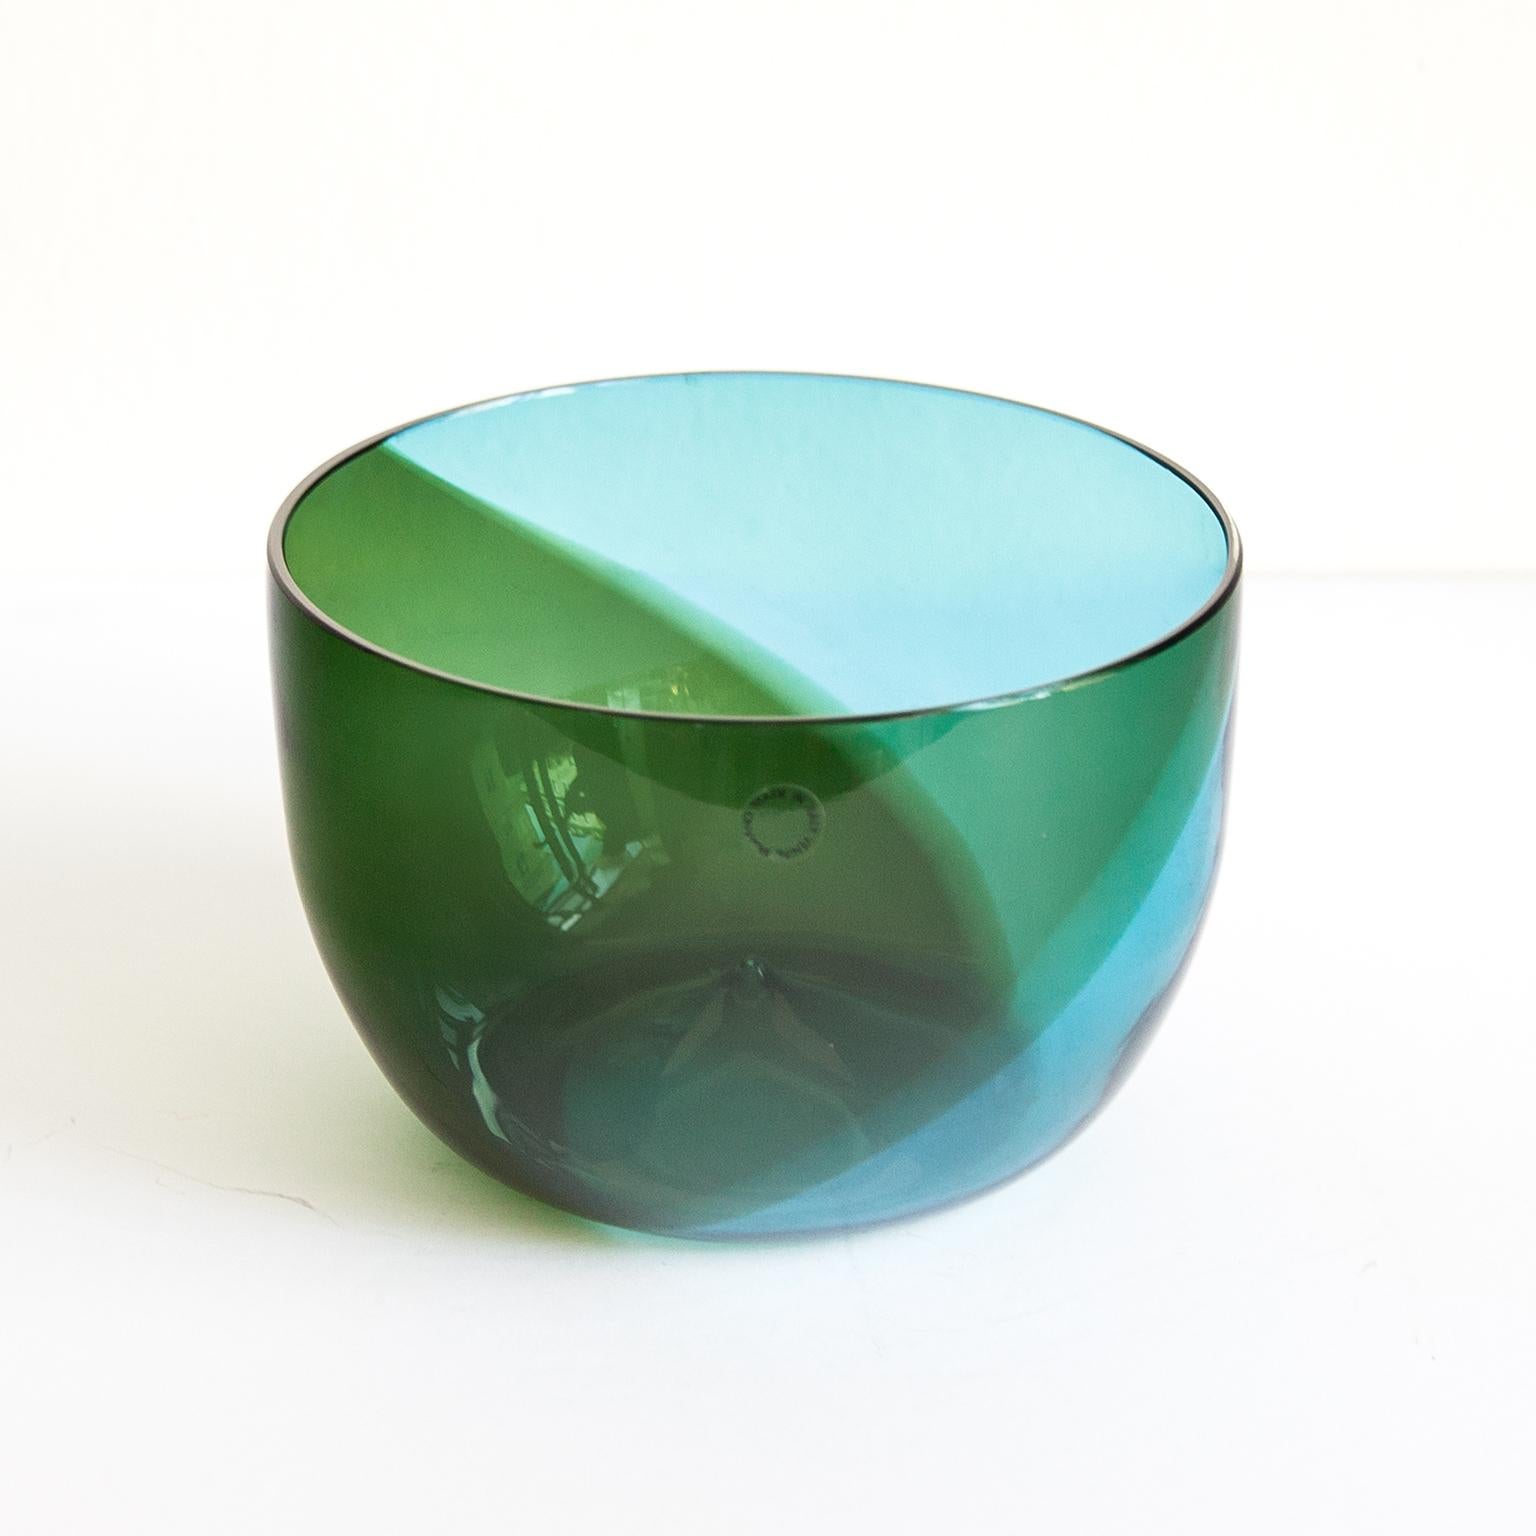 A Coreano art-object bowl, model 504.4, crafted in mesmerizing freeblown turquoise and applegreen glass. Designed by the renowned Tapio Wirkkala in 1966 for Venini.
The characteristic swirls of applegreen and turquoise glass lend it an enchanting